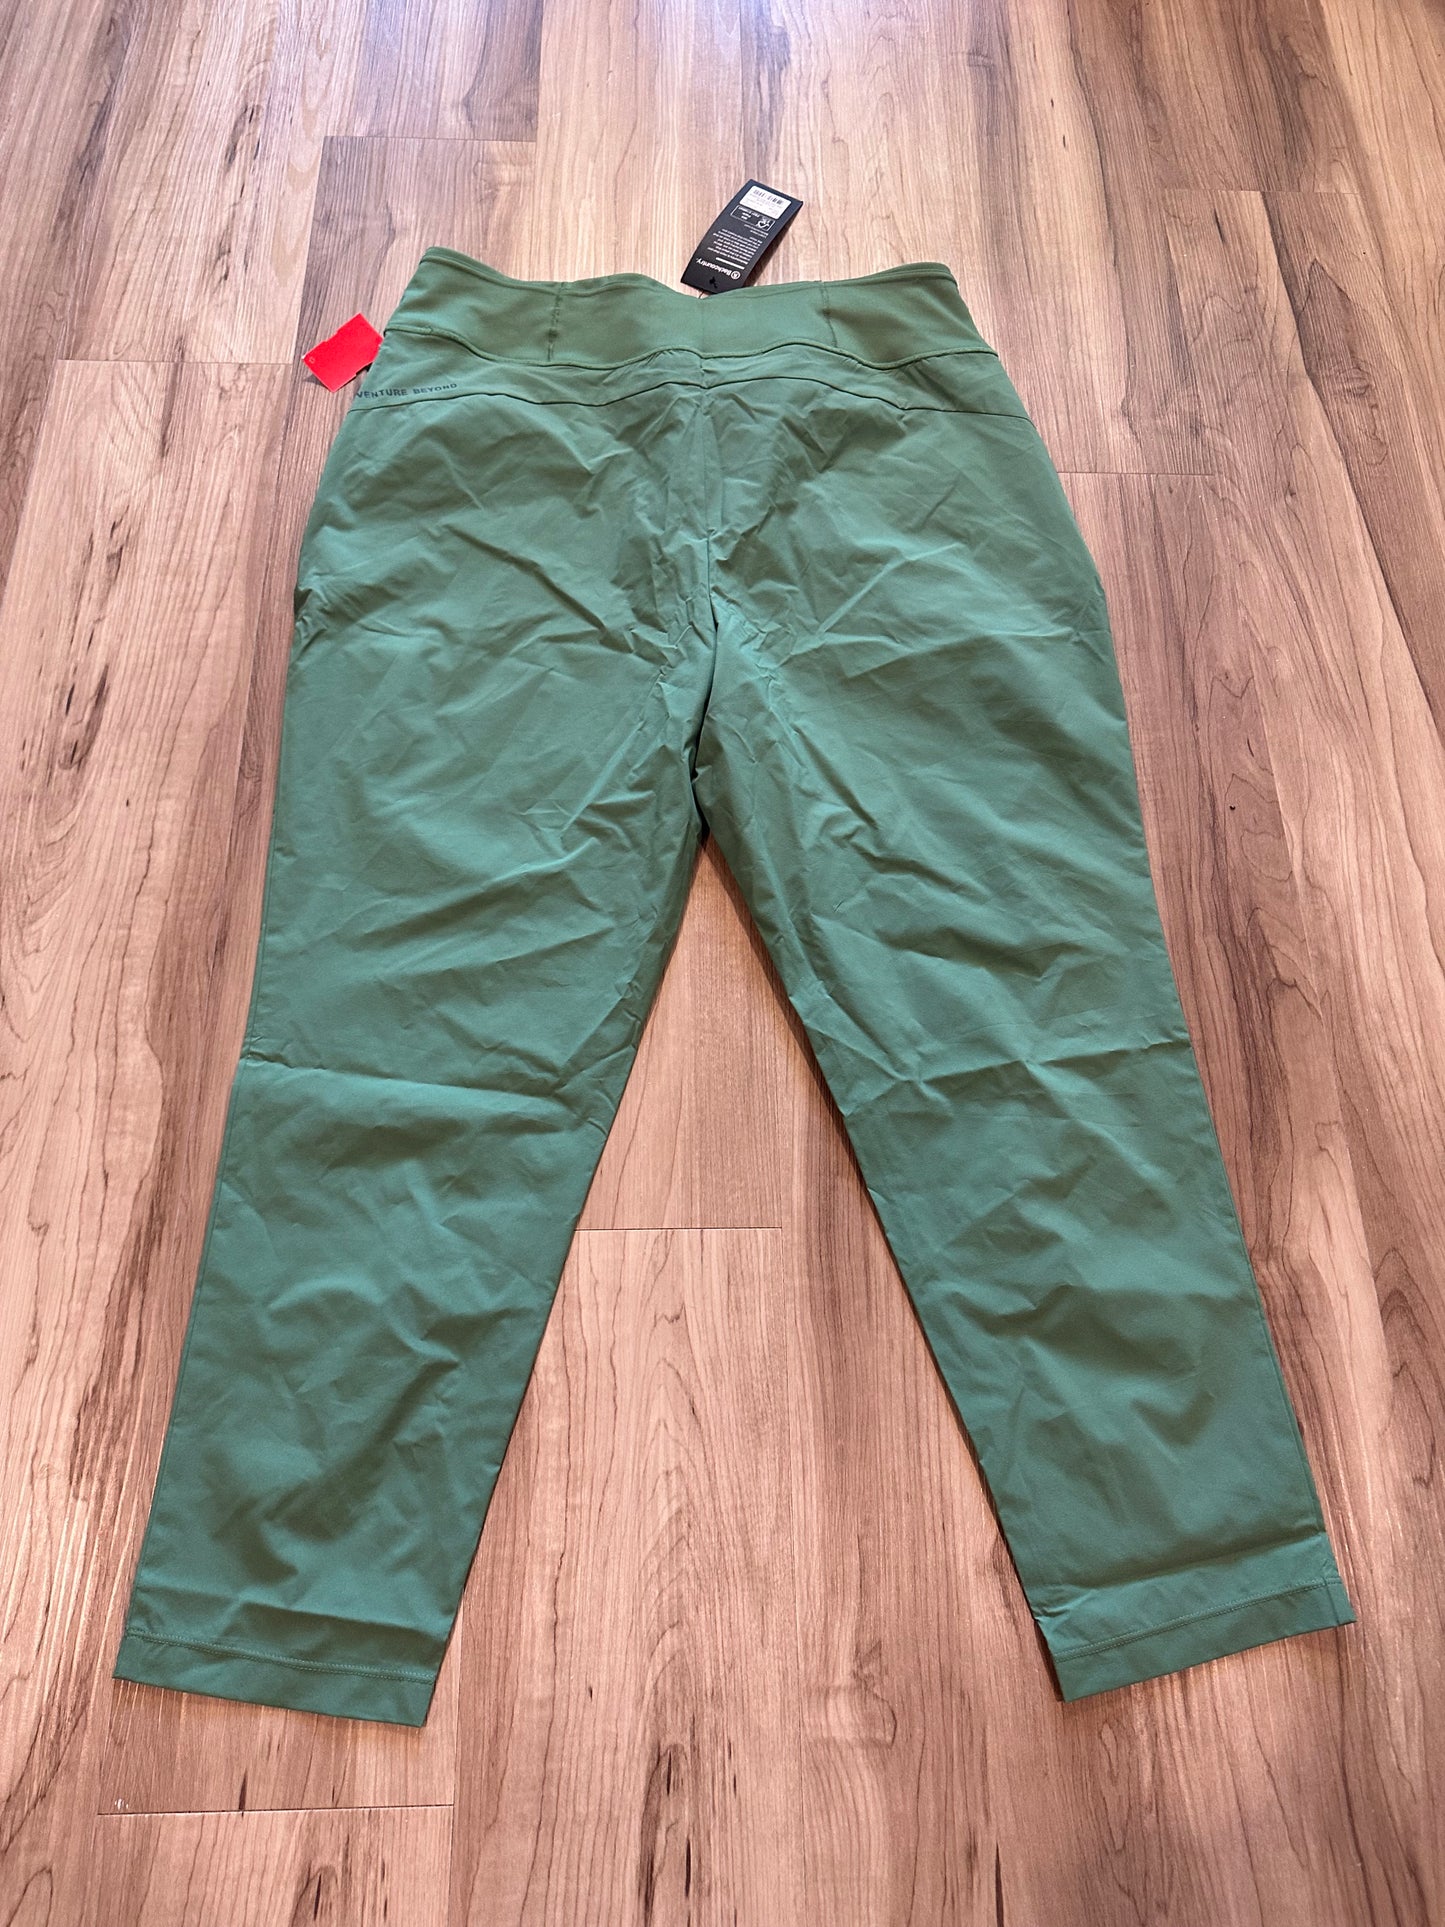 Athletic Pants By Back Country  Size: Xl